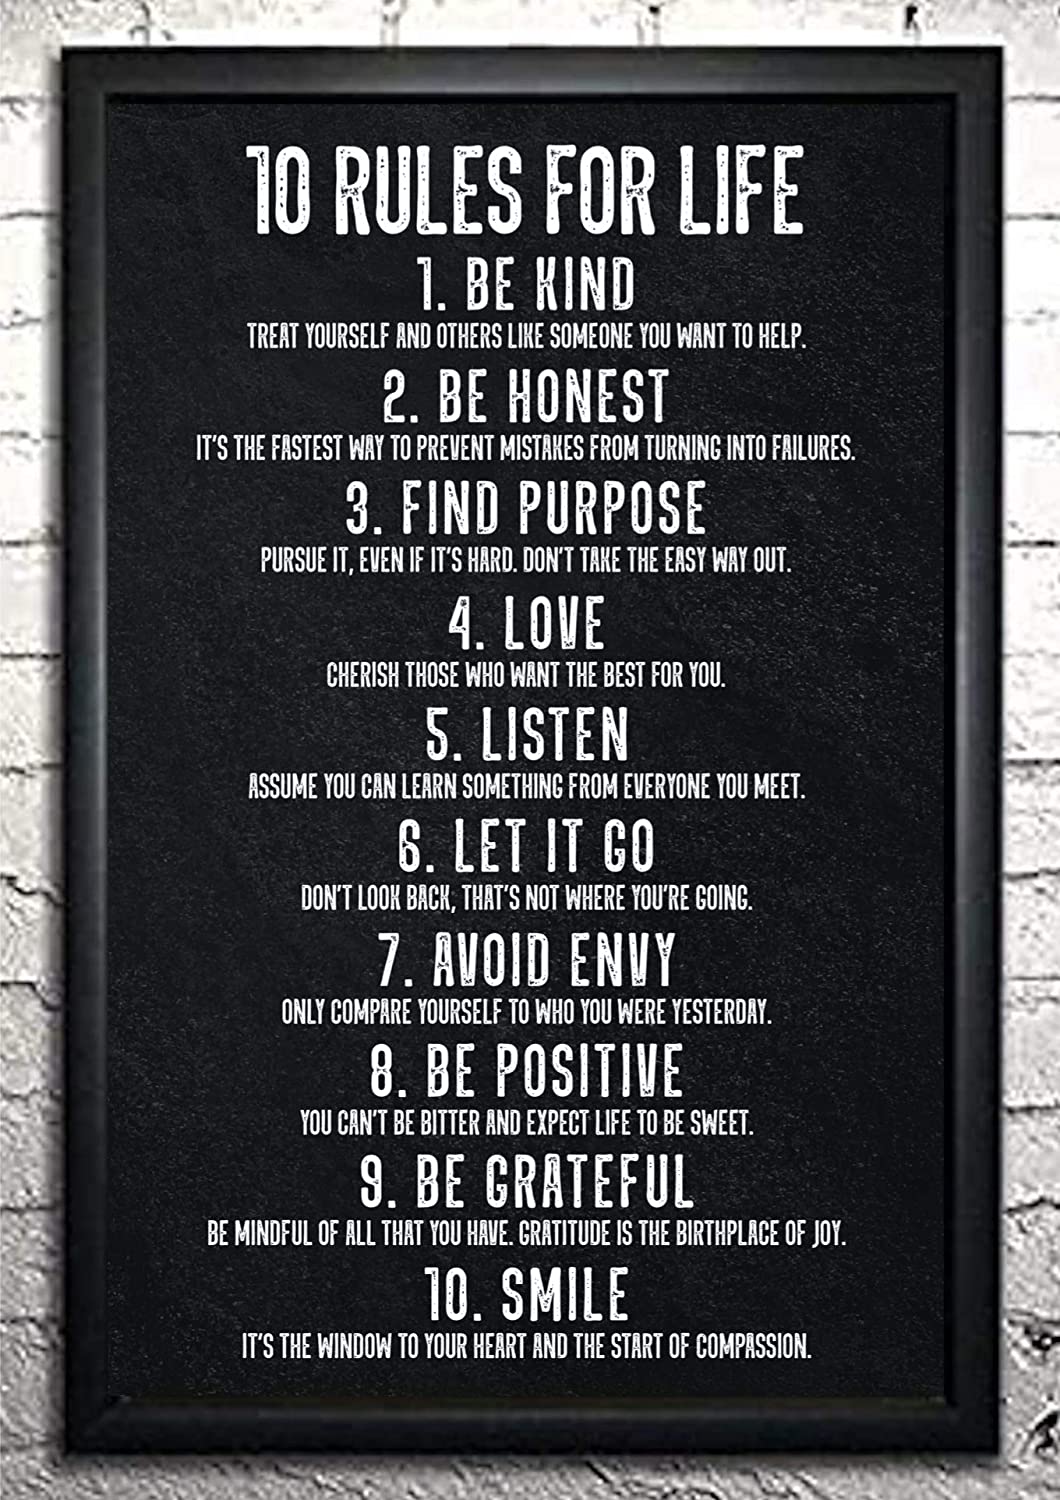 10 Rules For Life Inspirational Wall Art, Motivational Poster For Home, Bedroom, Office, Gym, Classroom